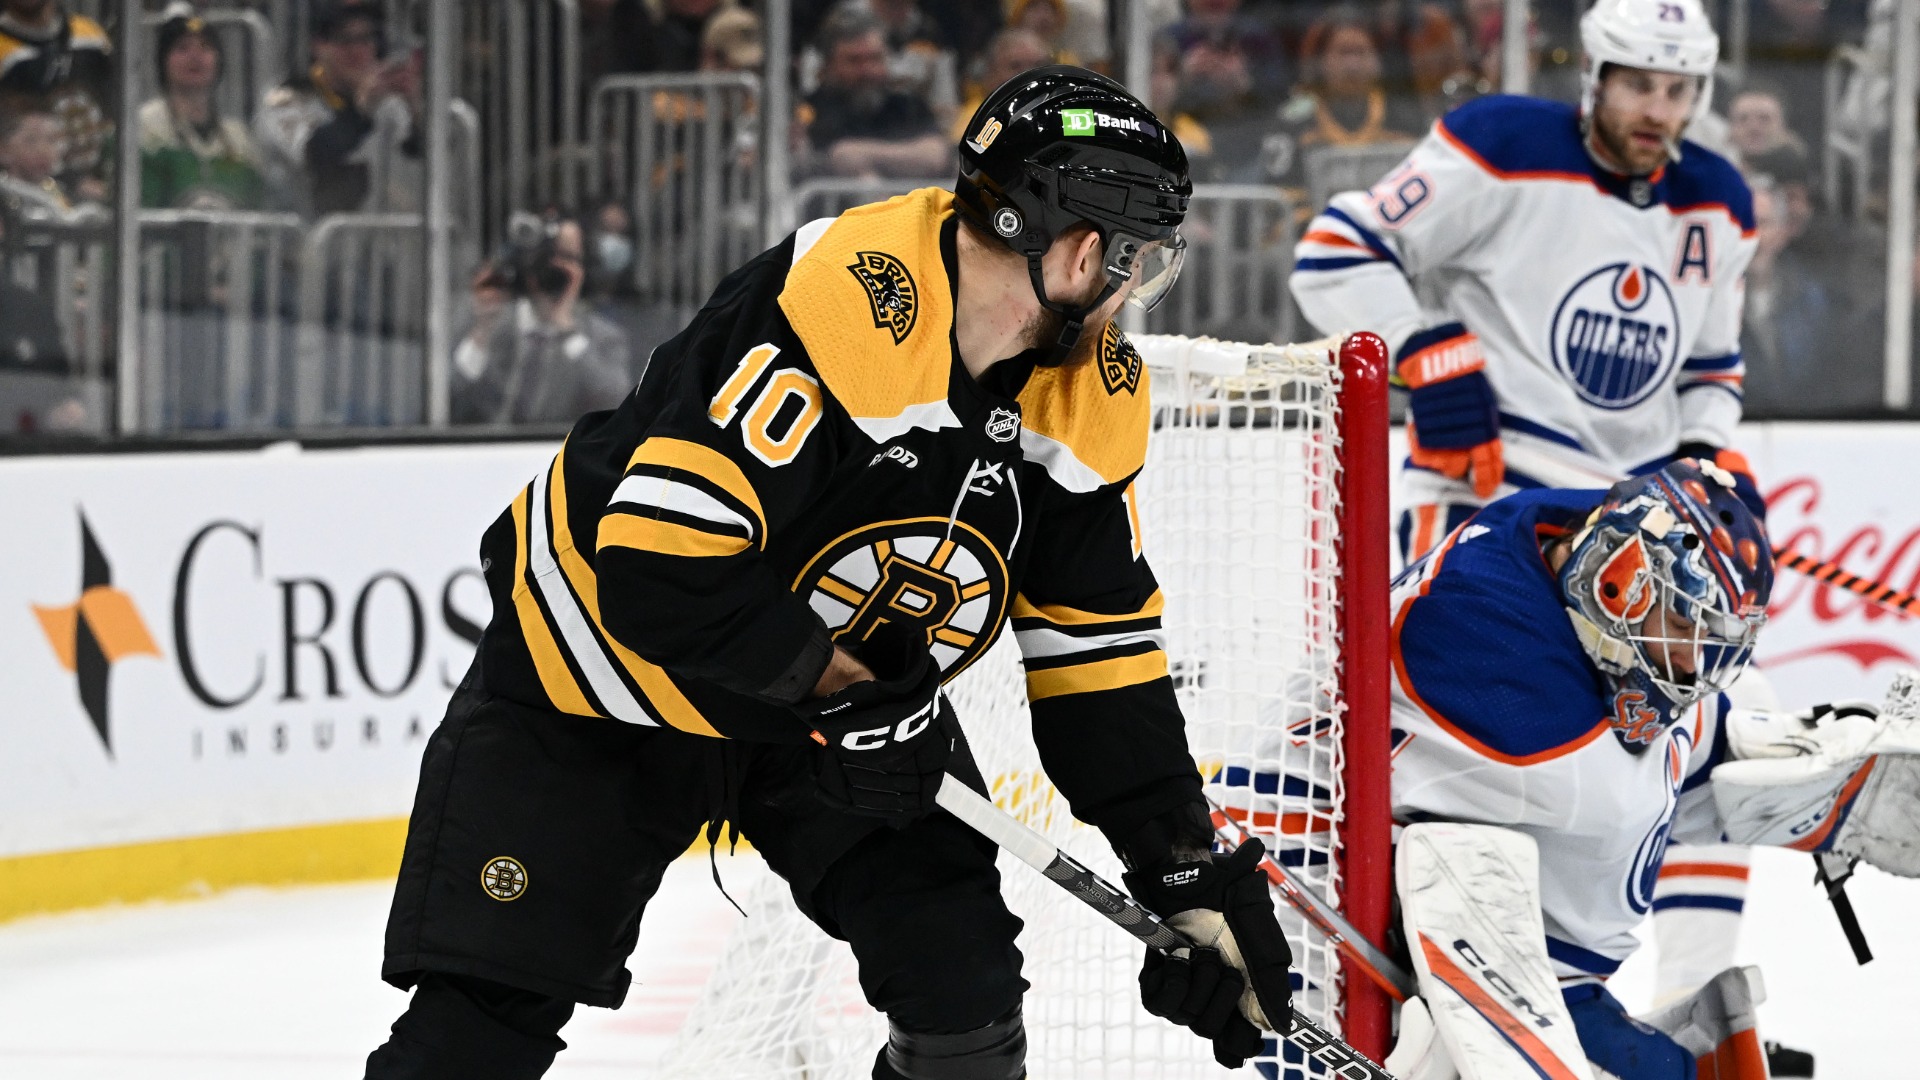 Boston Bruins' A.J. Greer suspended one game for cross-checking